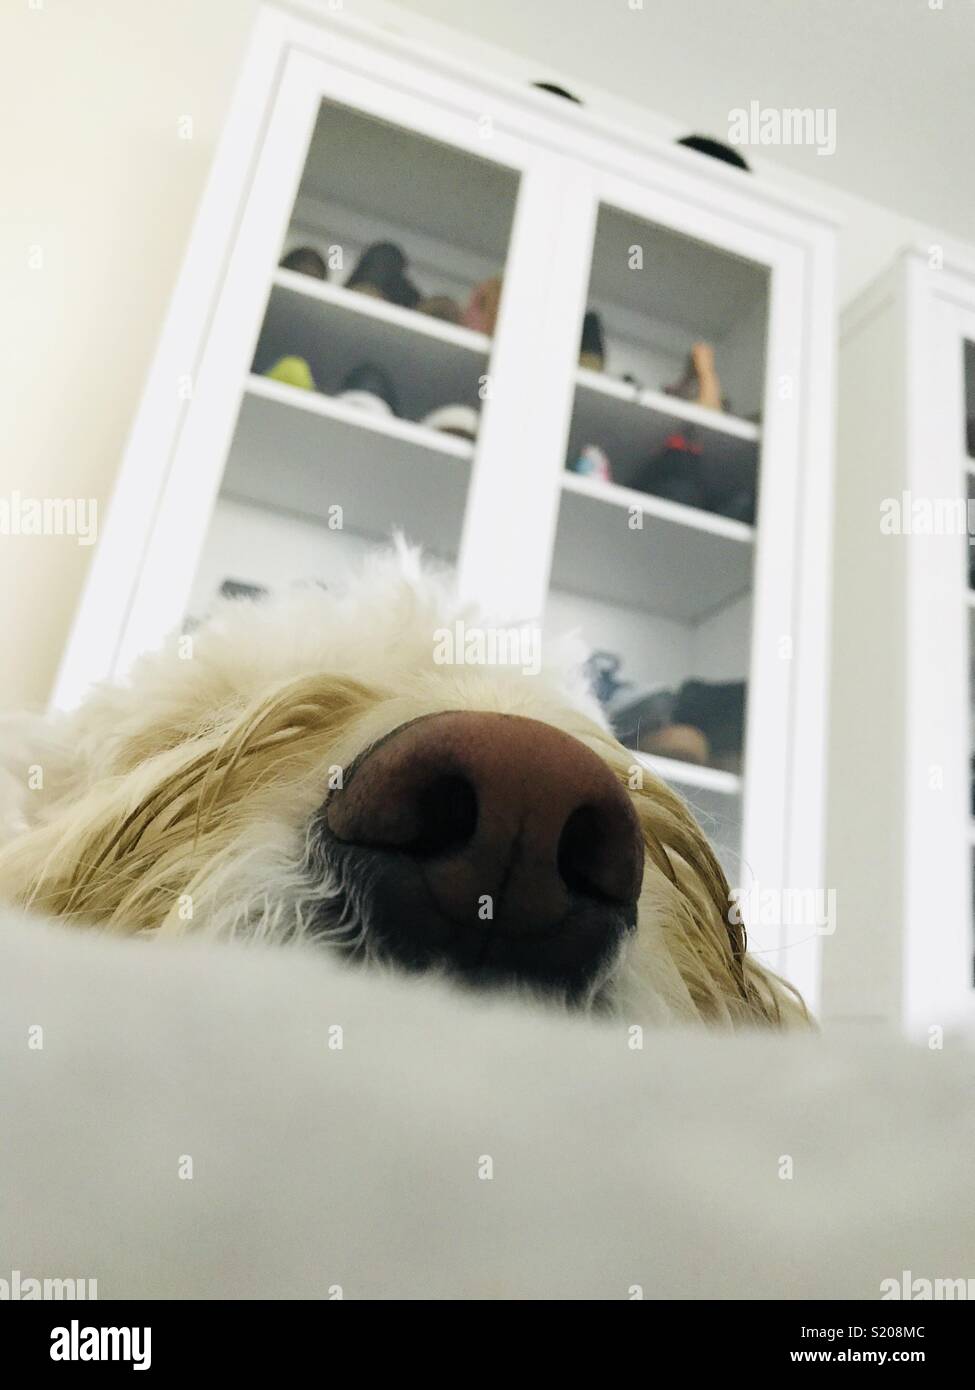 A dogs nose. Stock Photo